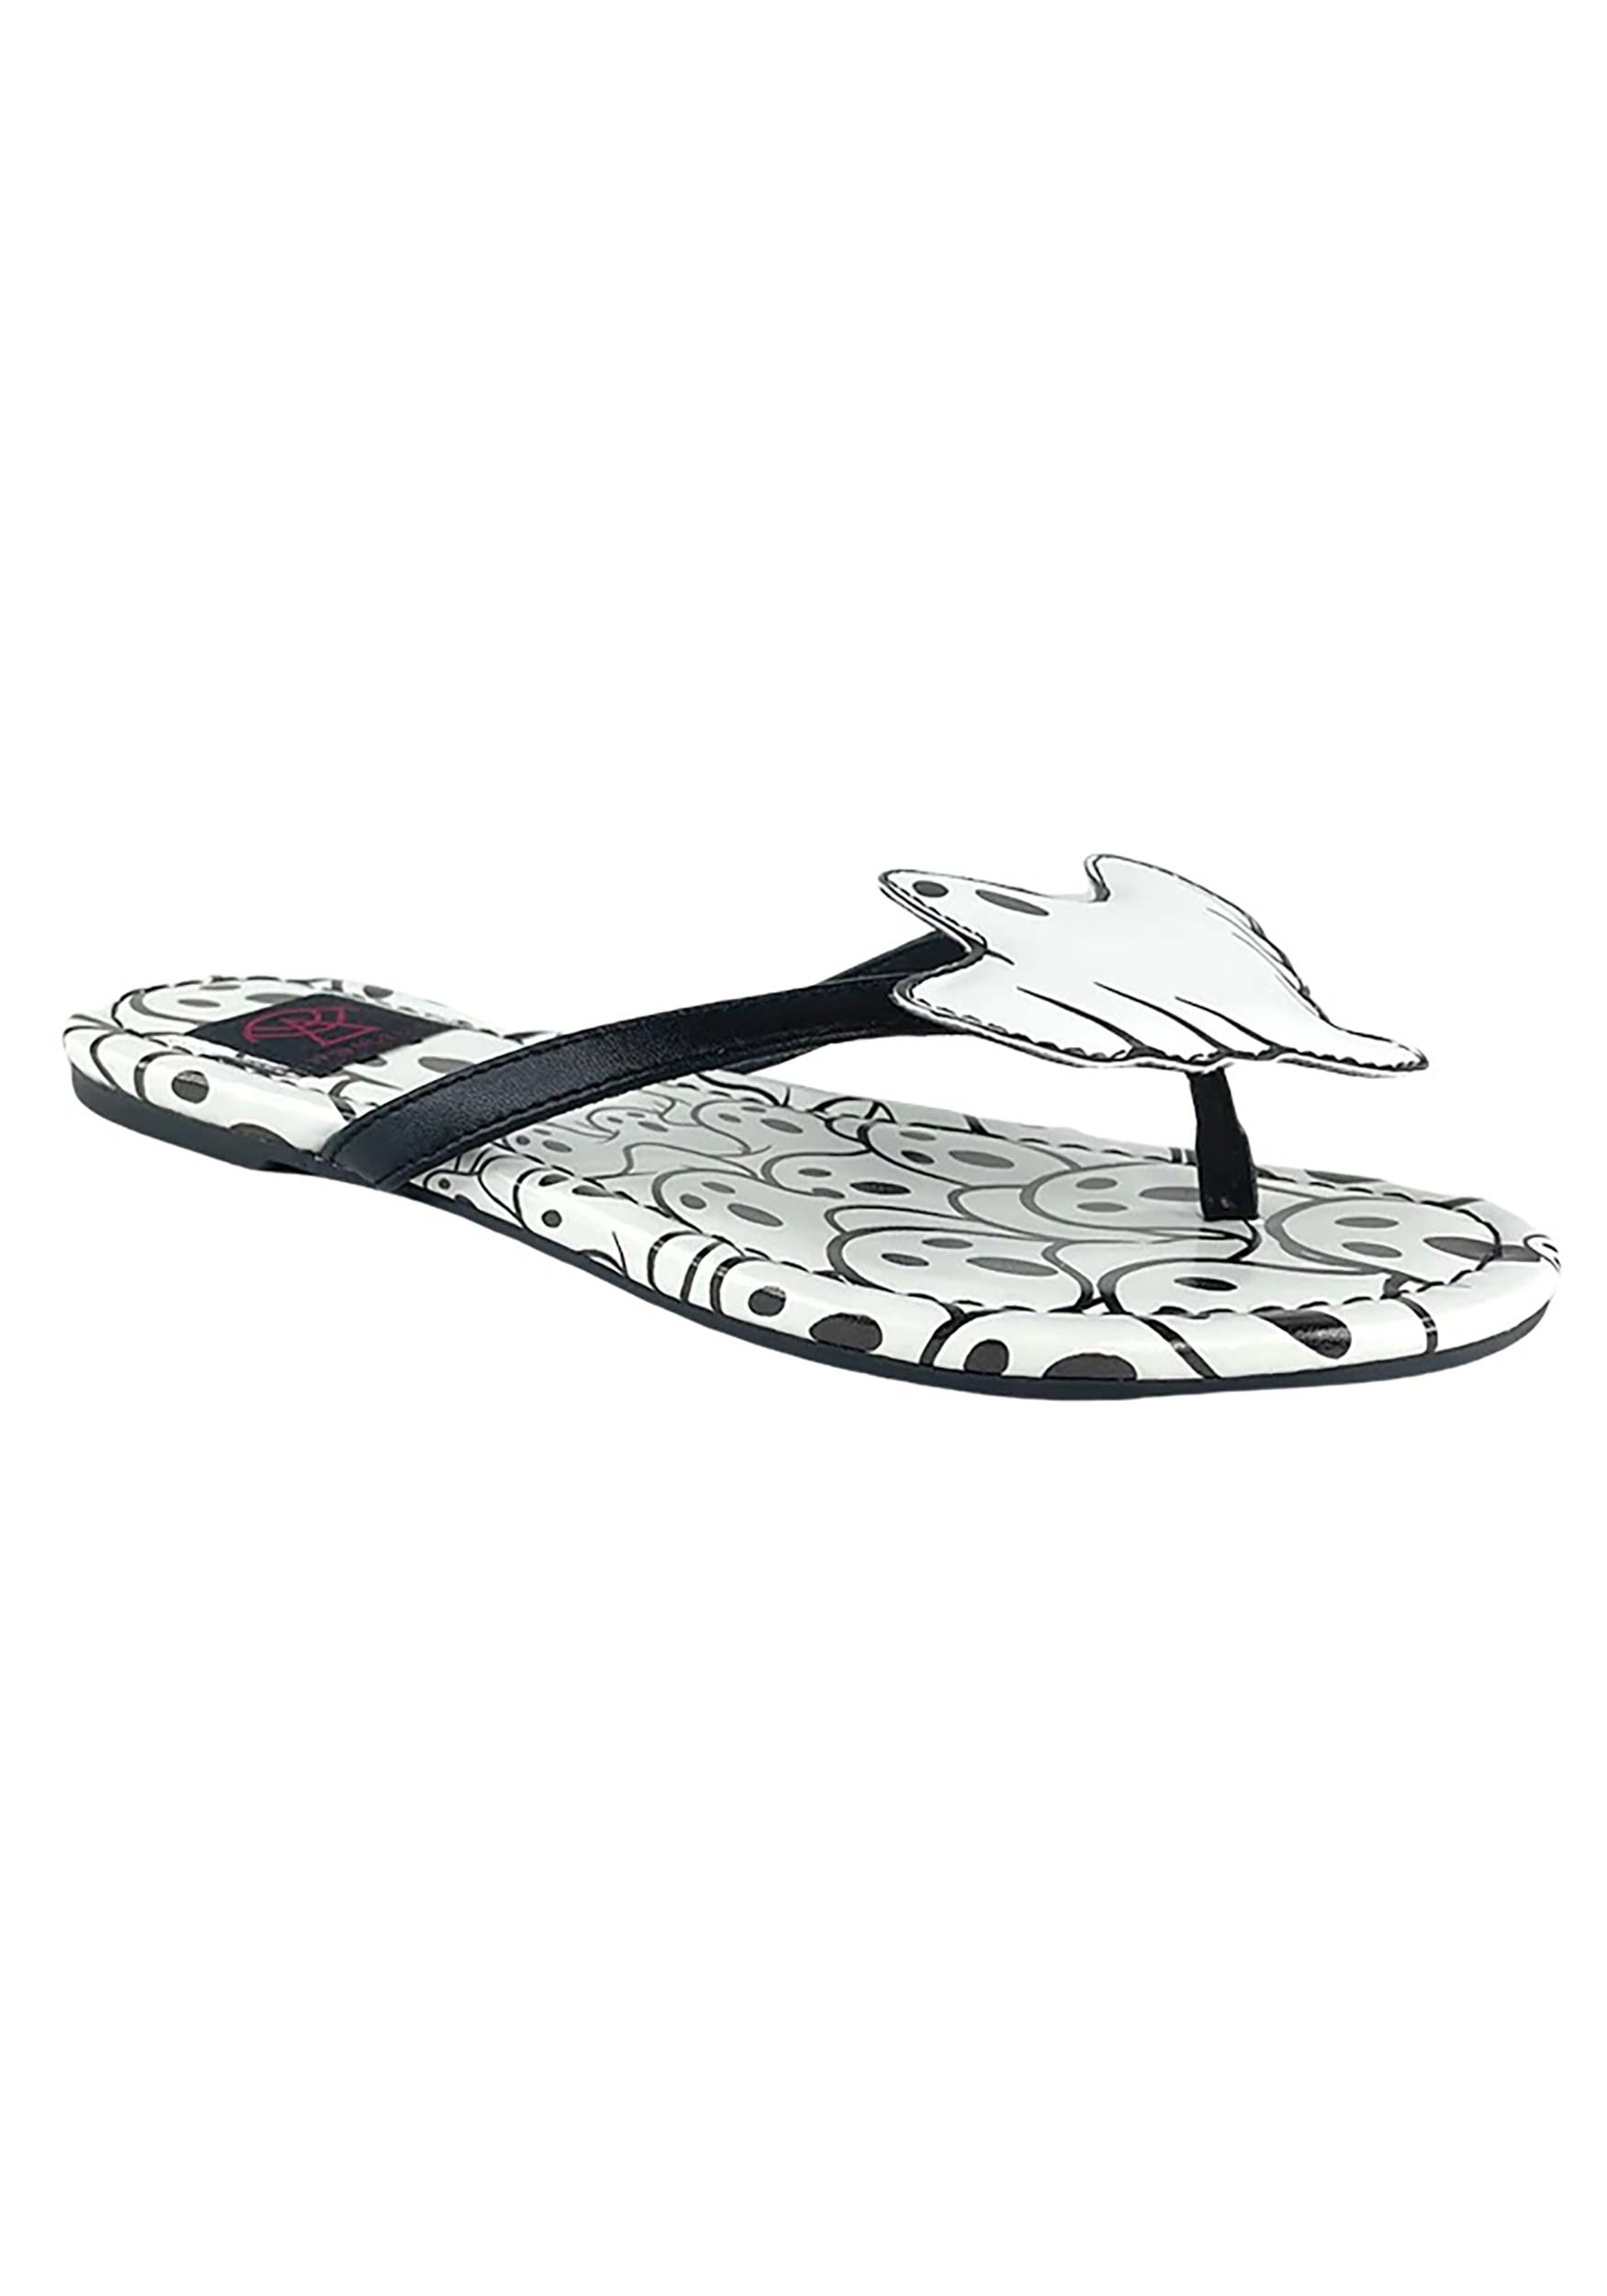 Ghost Icon Slip On Sandals